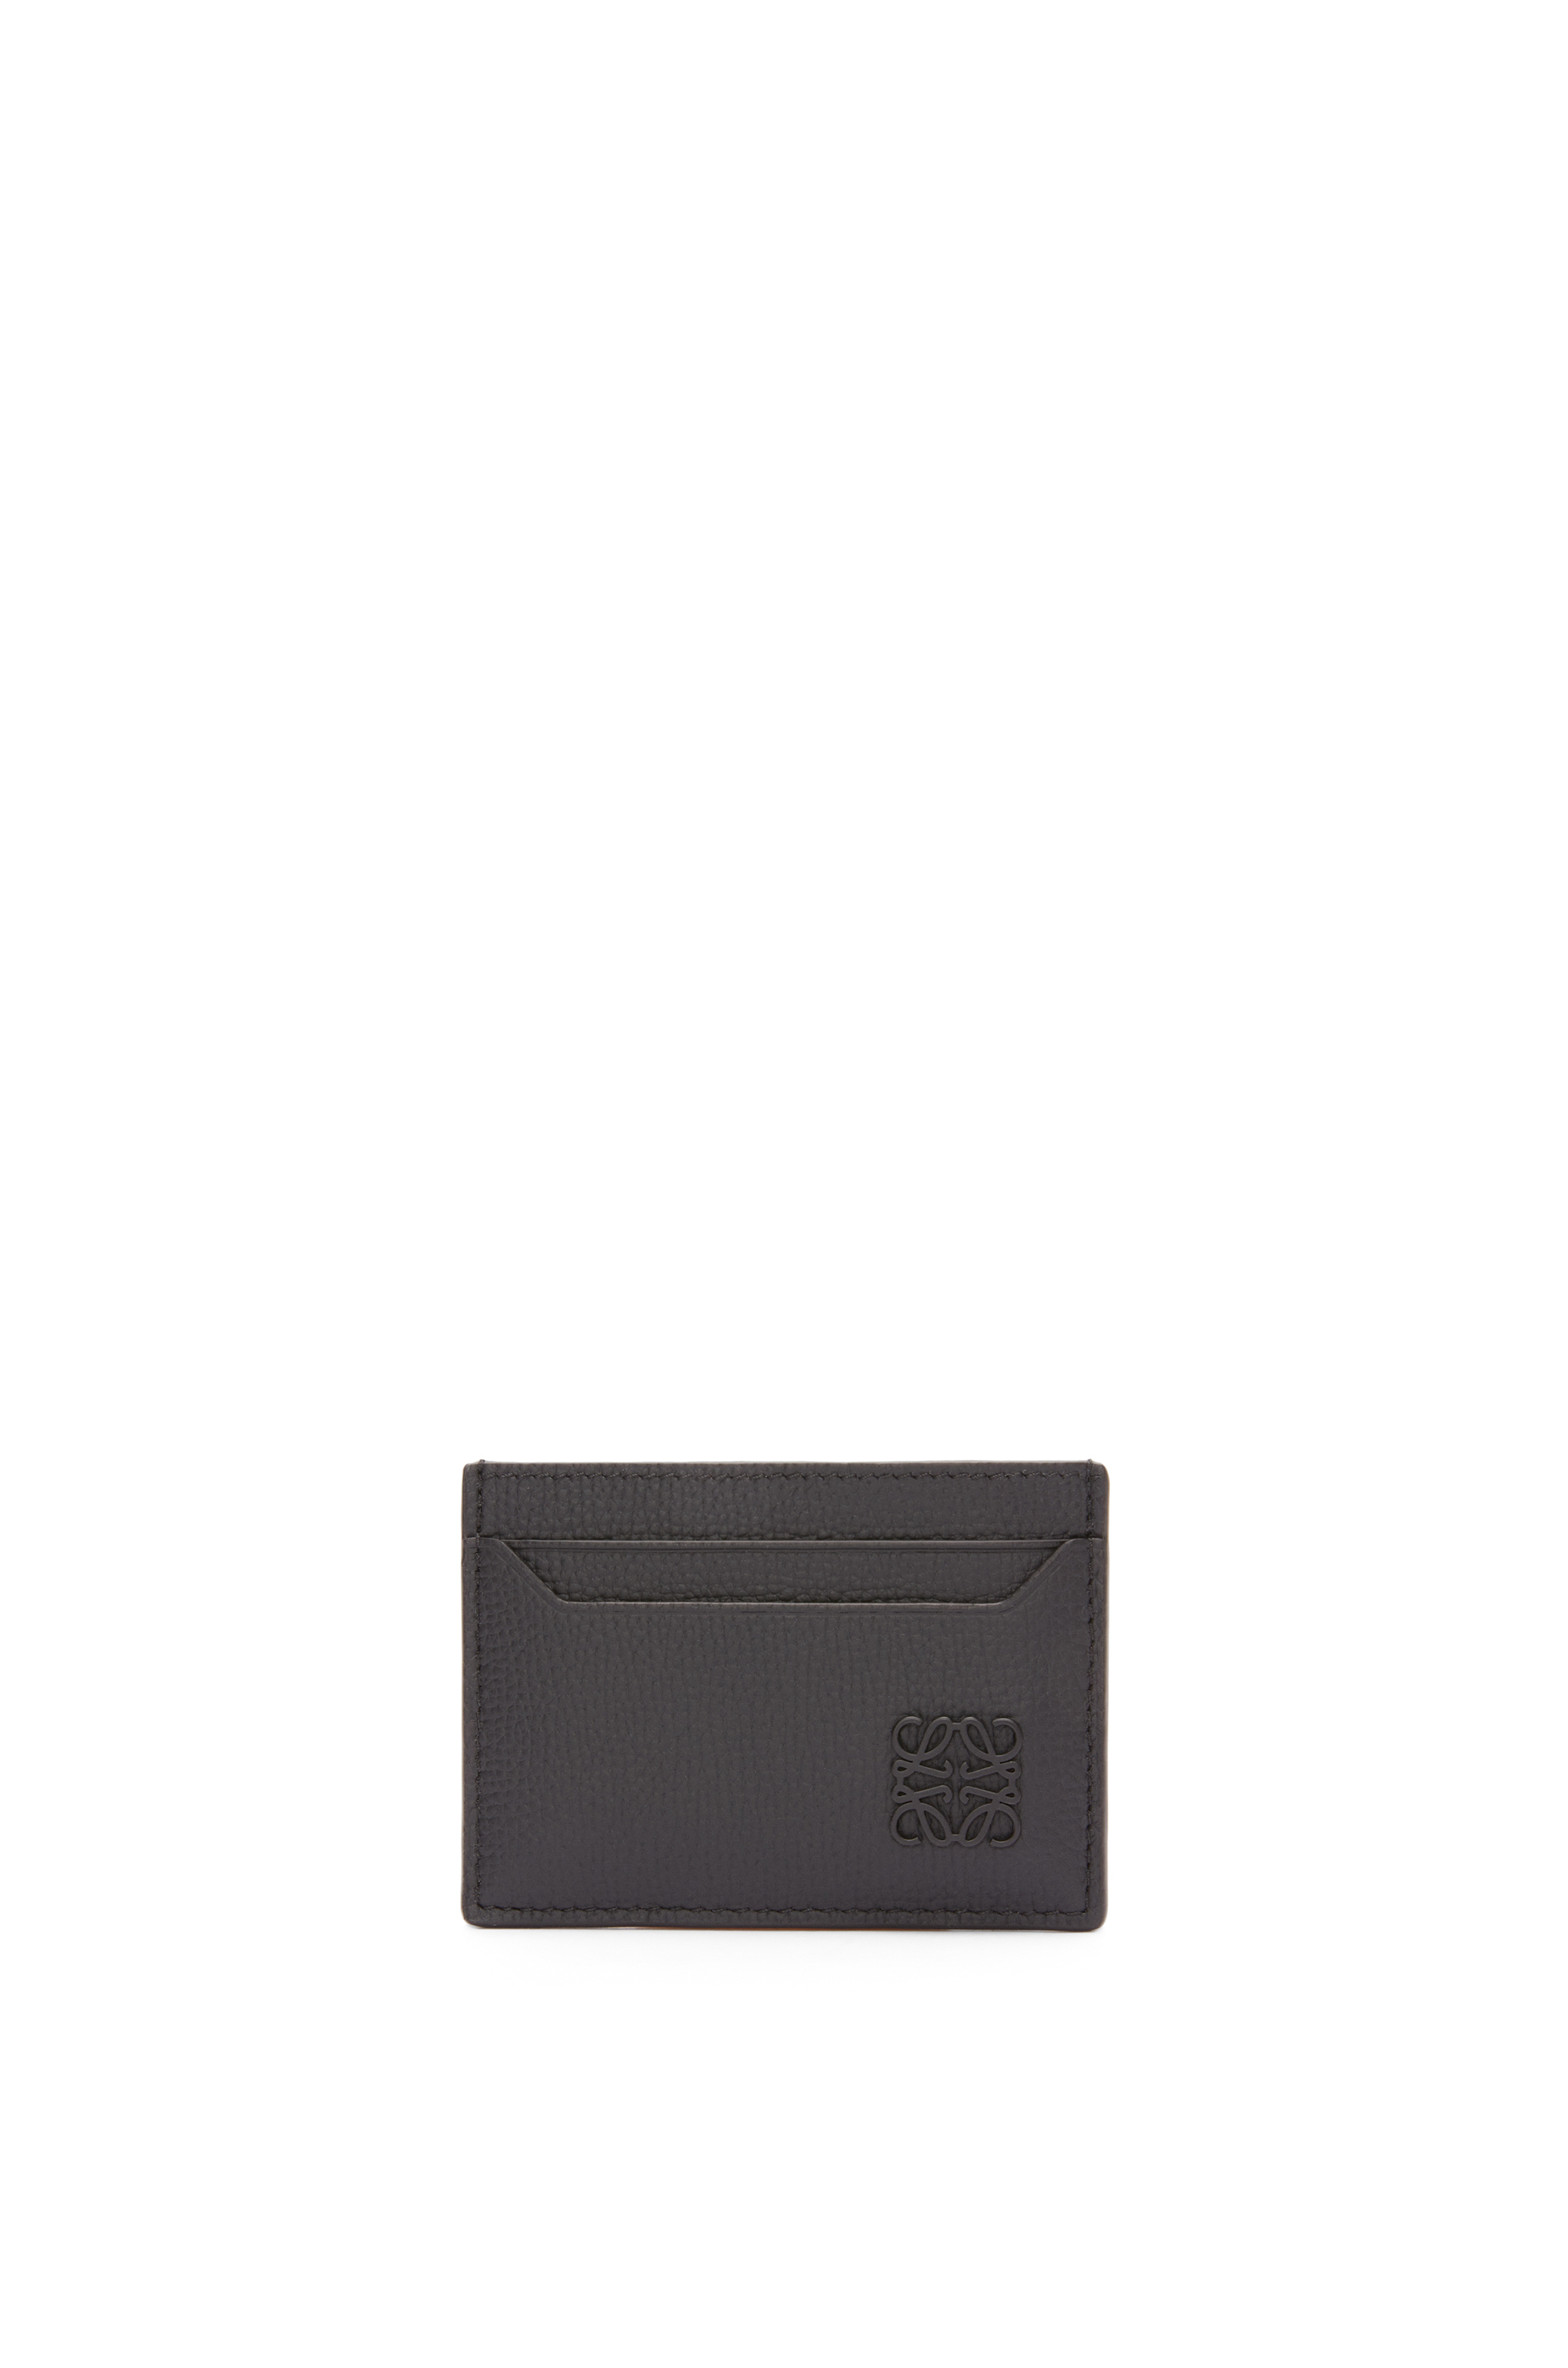 Luxury card cases & coin purses for women - LOEWE